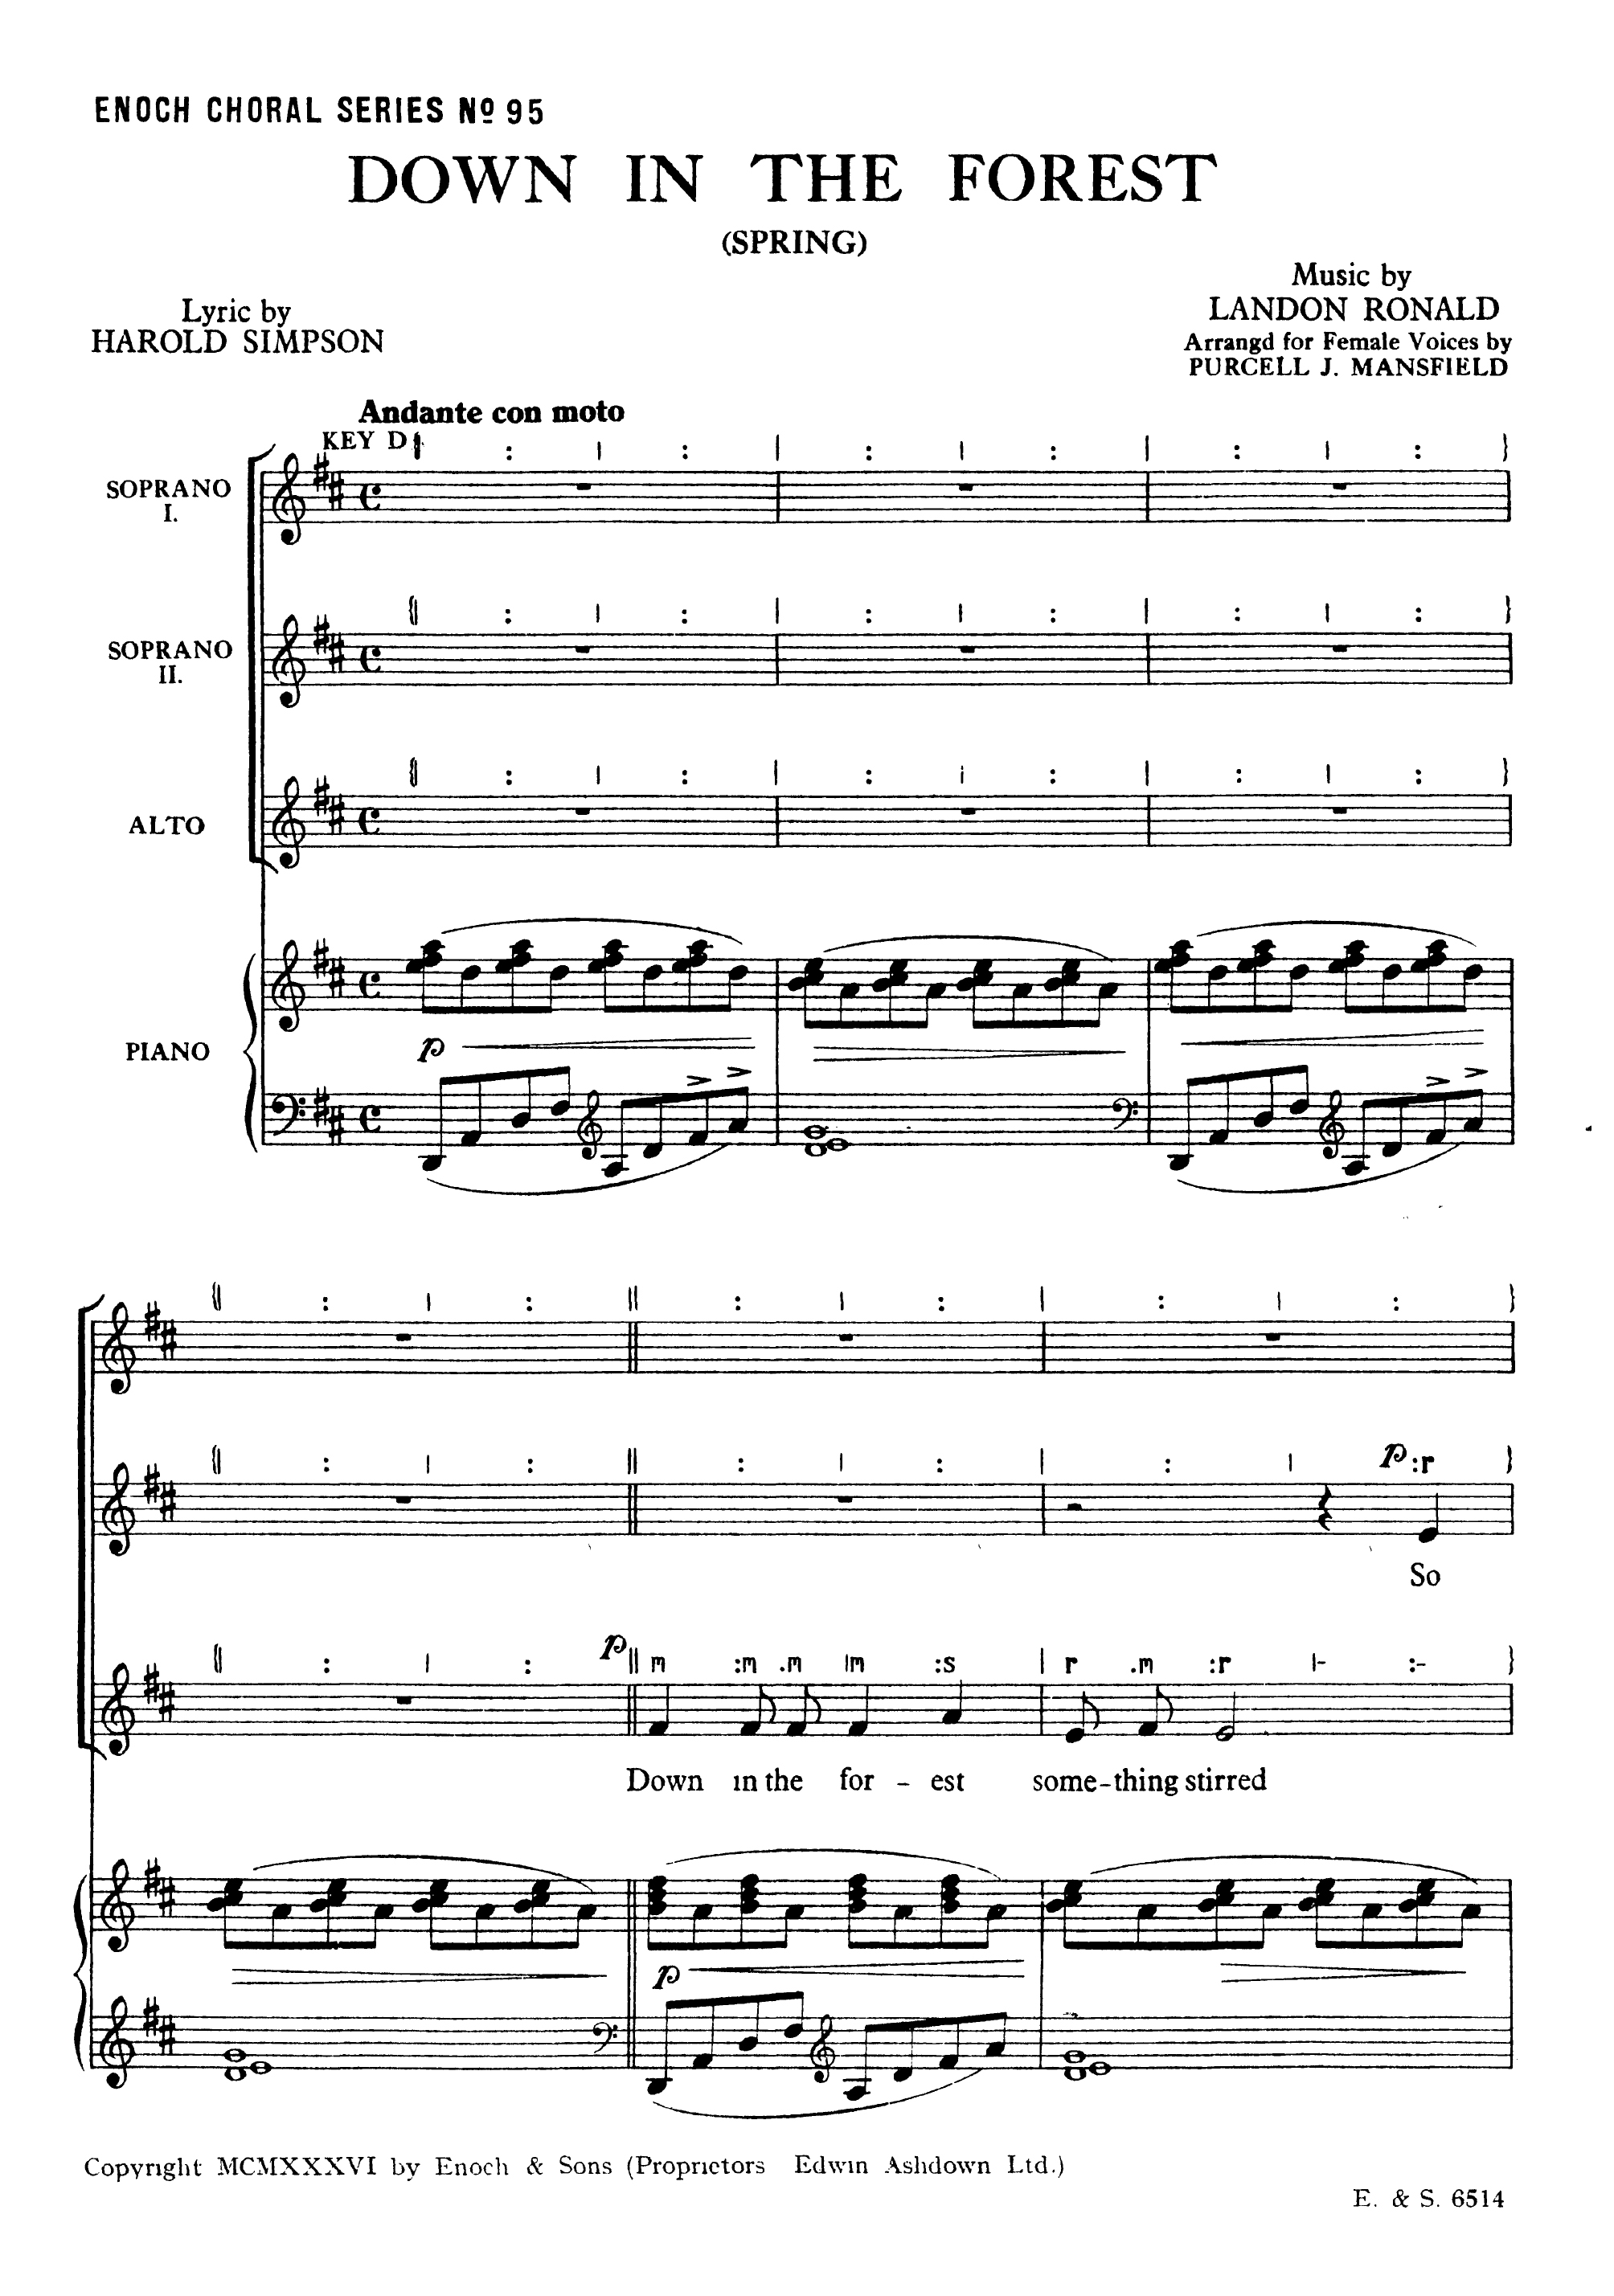 Landon Ronald: Down In The Forest: SSA: Vocal Score